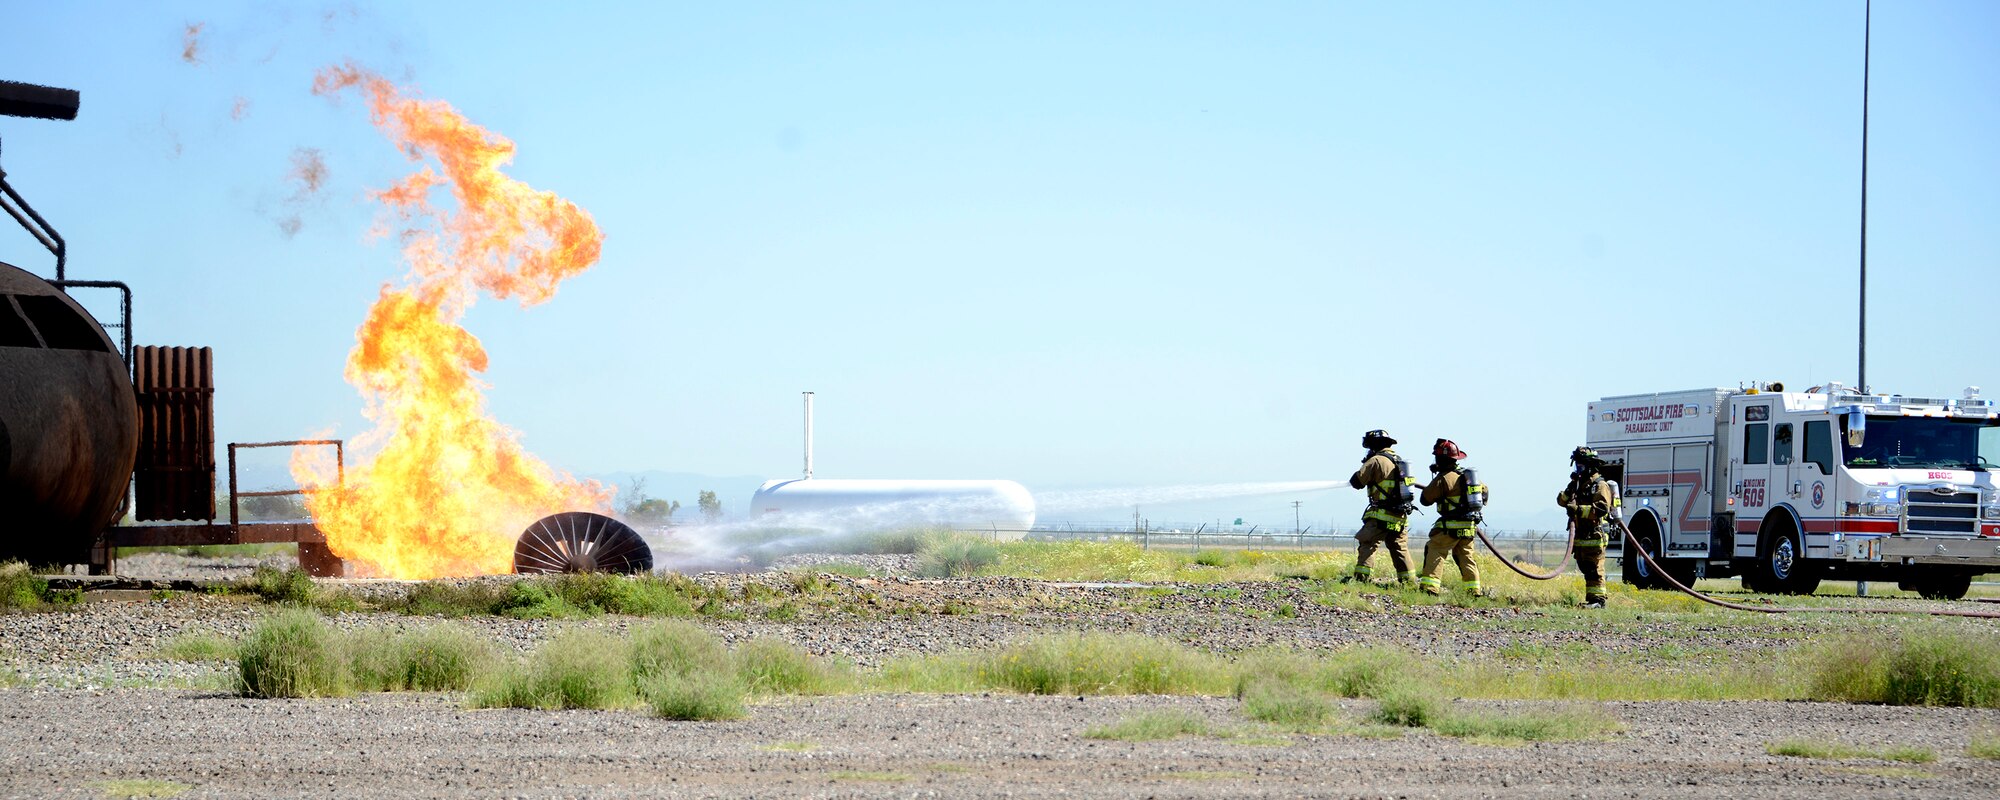 56th Civil Engineer Squadron firefighters and the Scottsdale Fire Department work together to put out a fire during a training exercise Mar. 16, 2017, at Luke Air Force Base, Ariz. The firefighters were training to respond to an aircraft fire. (U.S. Air Force photo by Senior Airman Devante Williams)  